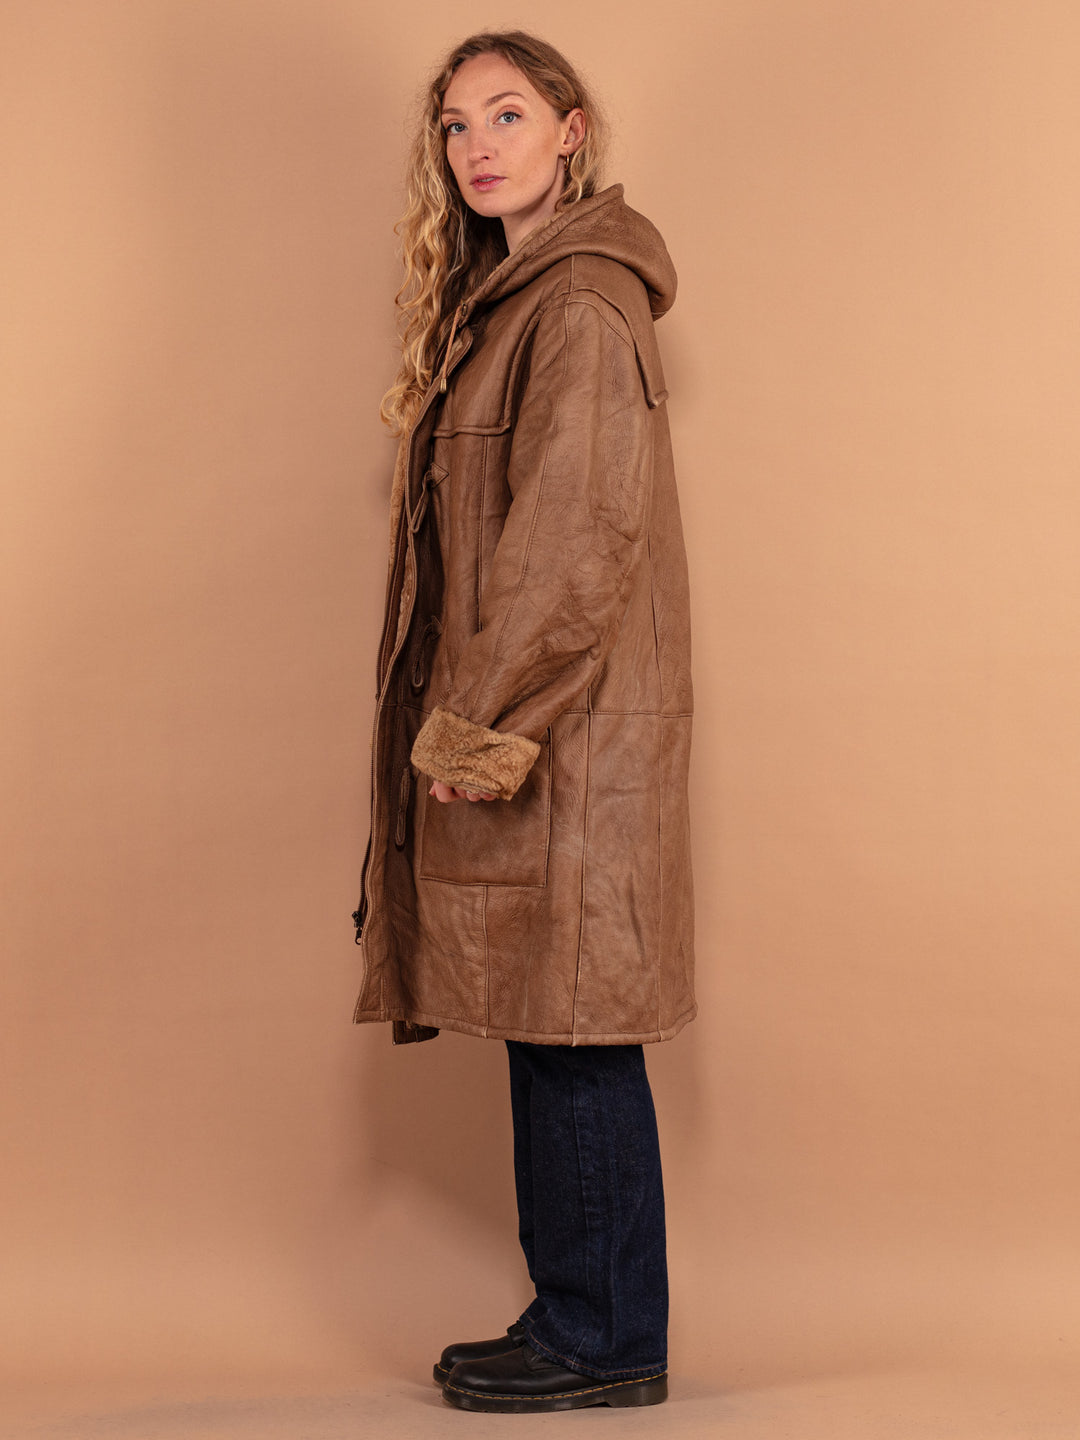 Oversized 90's Shearling Coat, Size XL, Vintage Women Casual Winter Coat, Brown Leather Duffle Coat, Zip Up Toggle Coat, 90s Sheep Outerwear